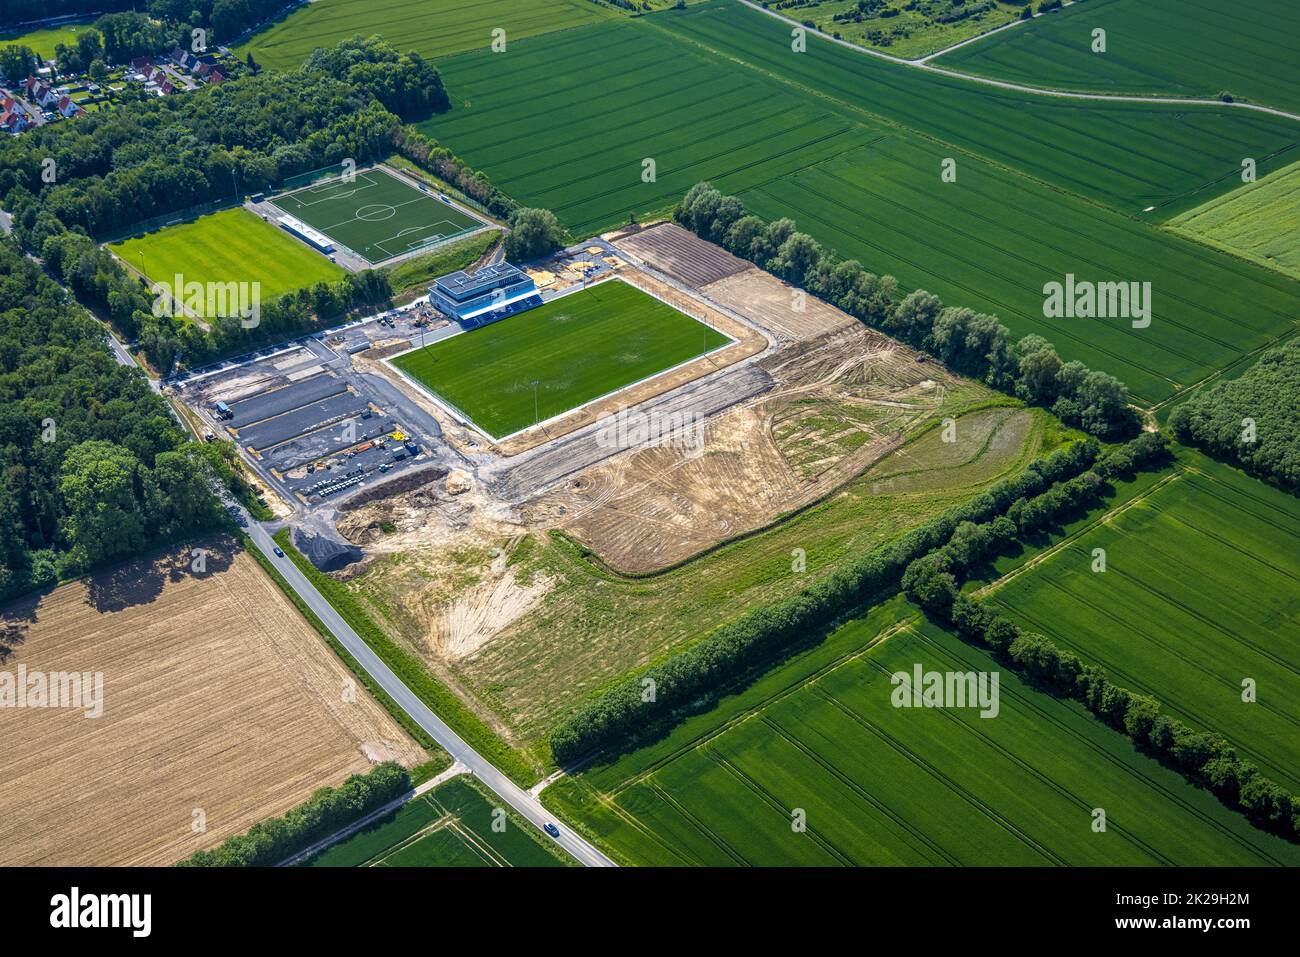 Aerial view, construction site and new building Westfalia Sportpark, sports field and club center Westfalia Rhynern with integrated sports day care ce Stock Photo